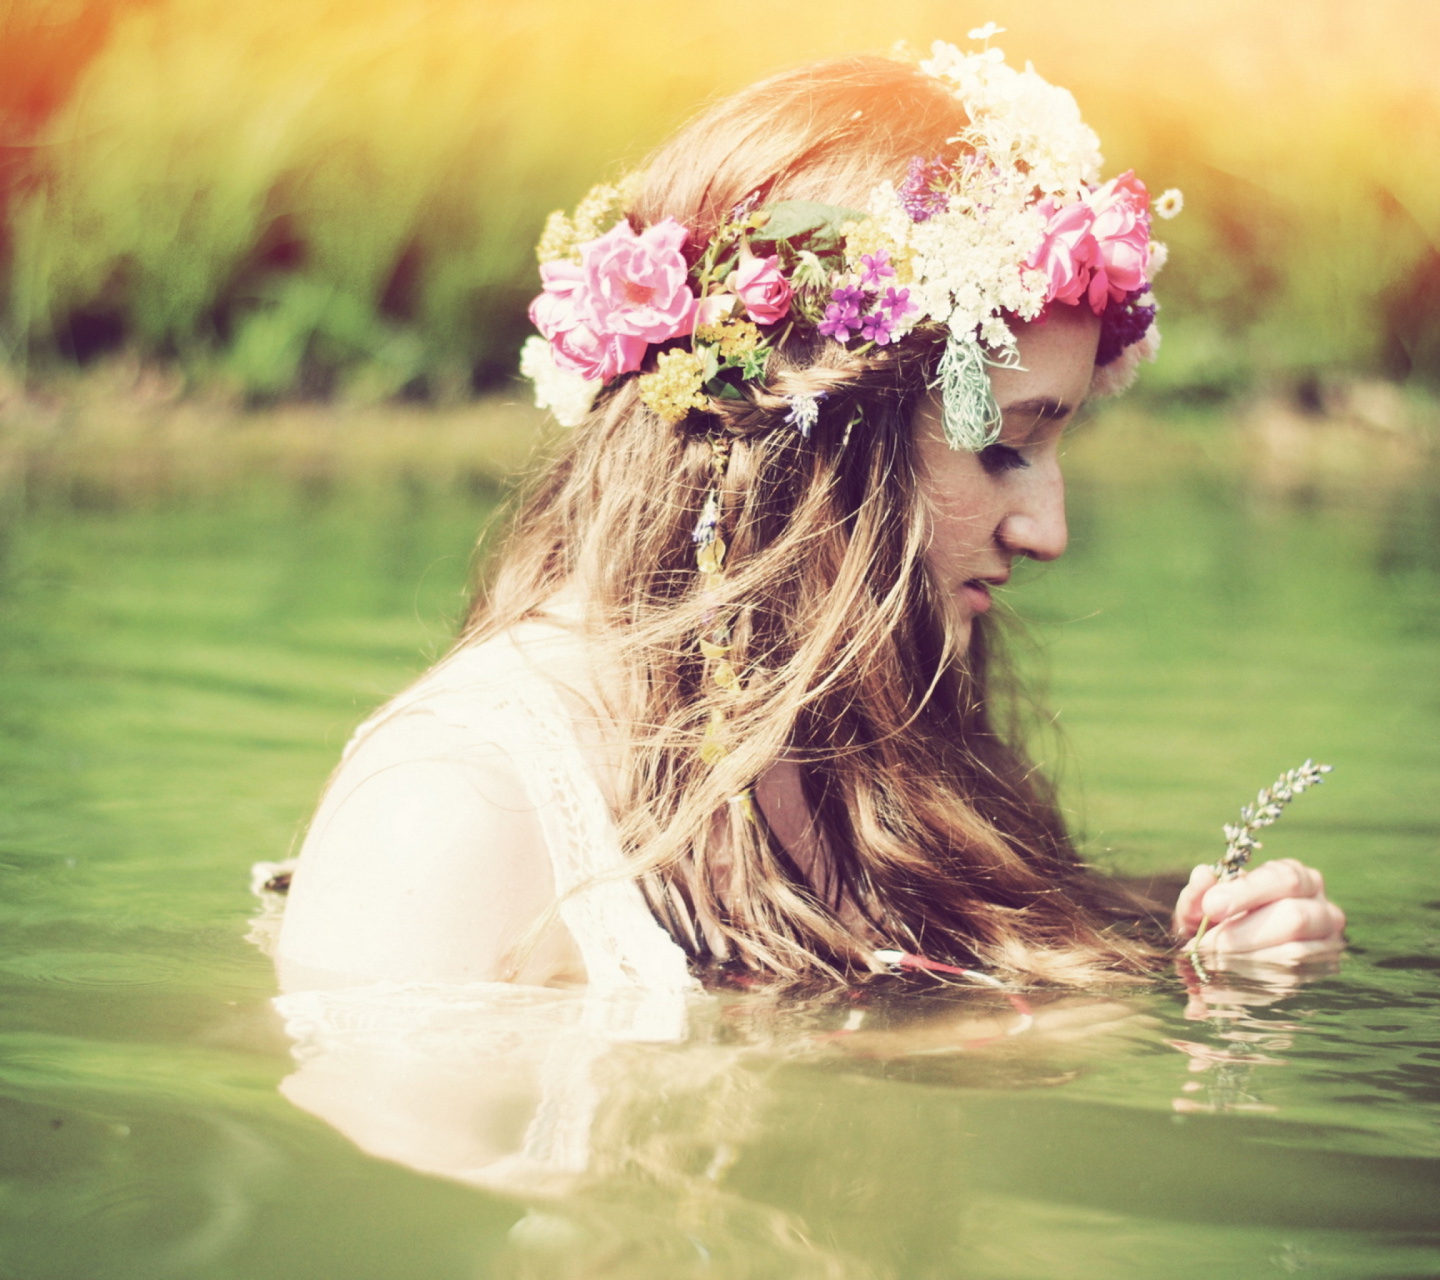 Girl With Flower Crown wallpaper 1440x1280